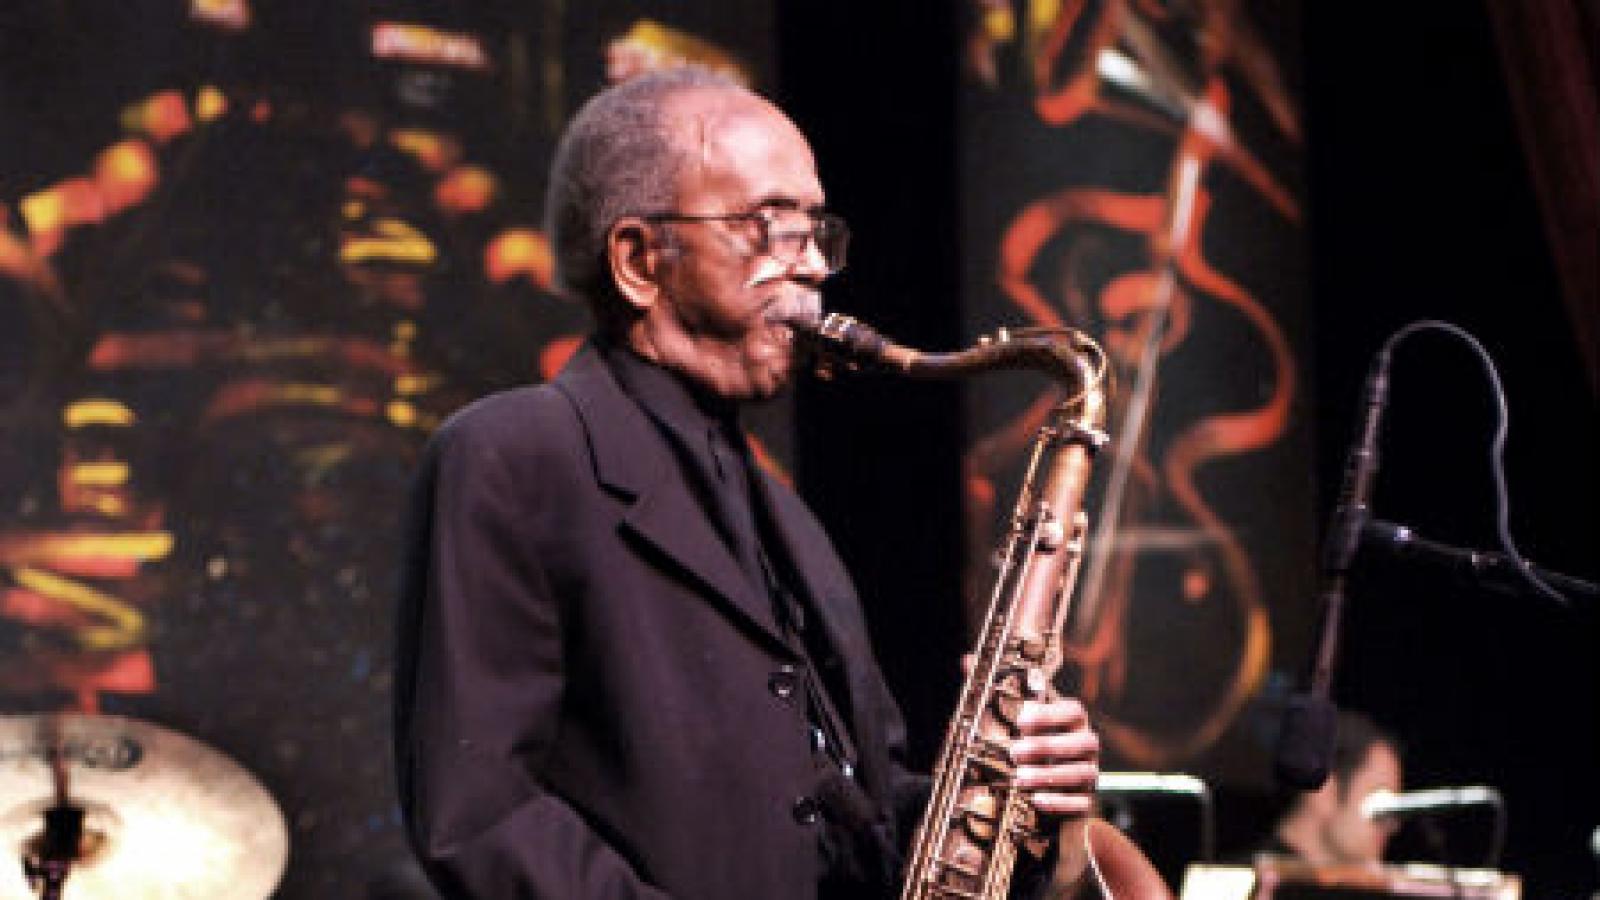 Jimmy Heath performing at the annual NEA Jazz Masters awards concert held at Jazz at Lincoln Center in New York City. Photo by Tom Pich